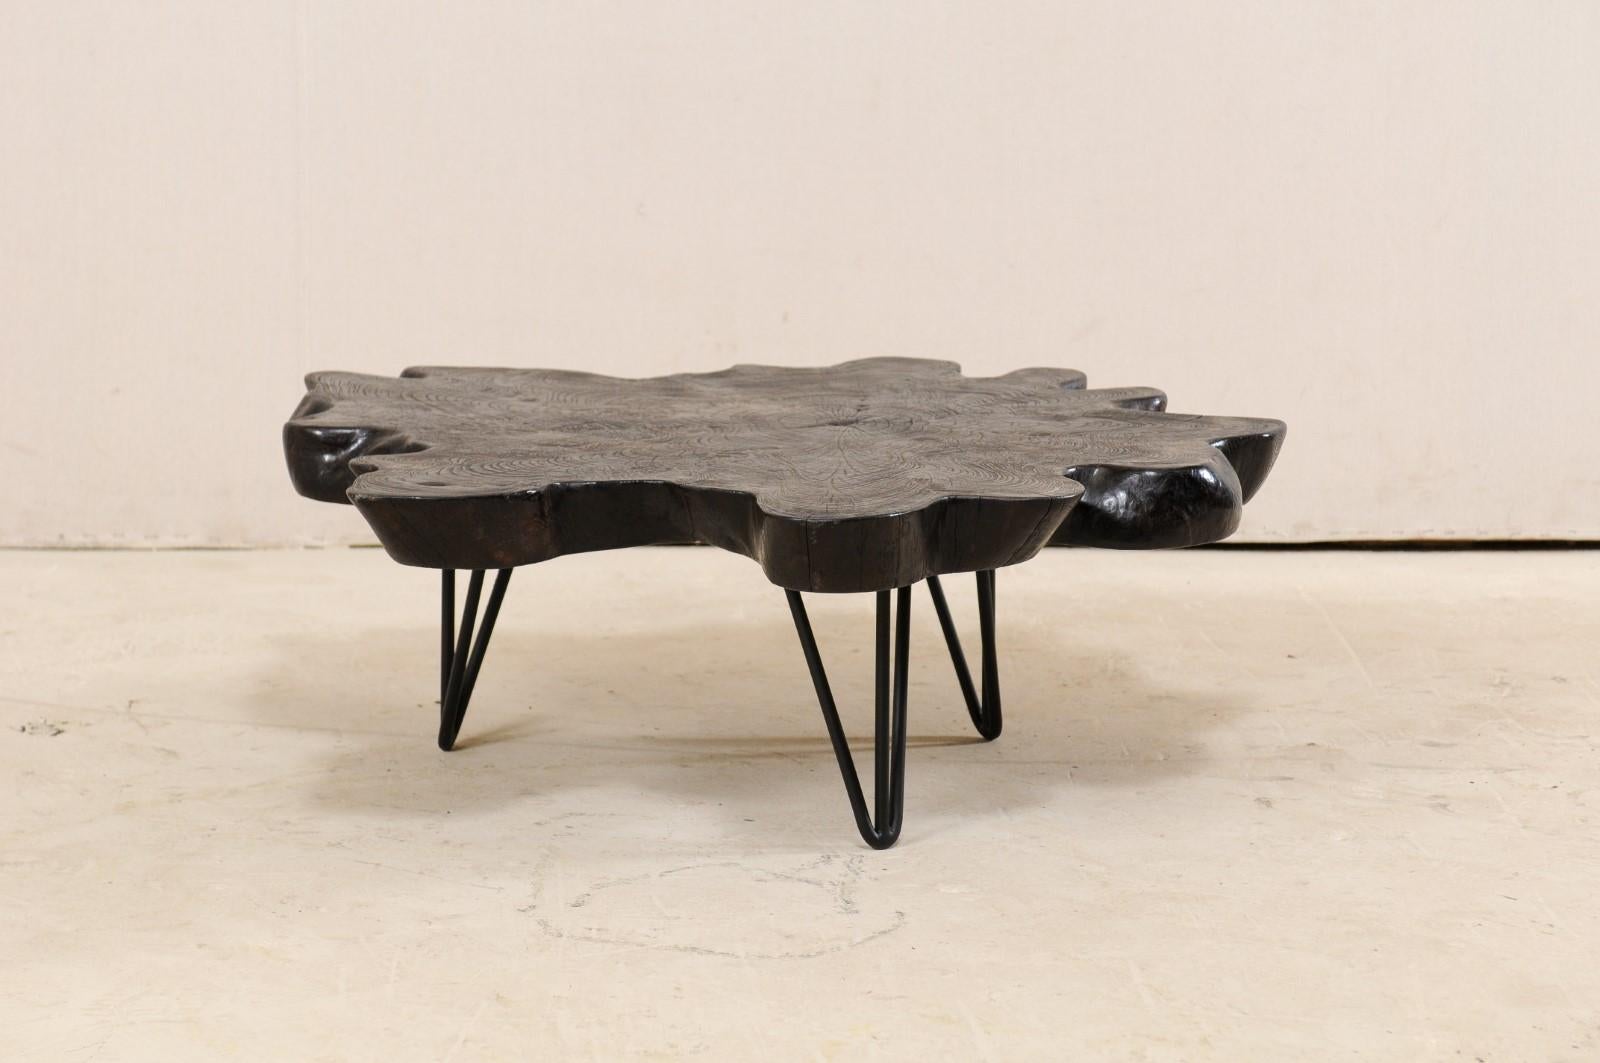 A custom teak slab coffee table with iron base. This rustic yet chic coffee table has been fashioned from a beautifully shaped piece of teak wood slab which has been presented upon three iron legs, with open triangular shapes. The wood has been